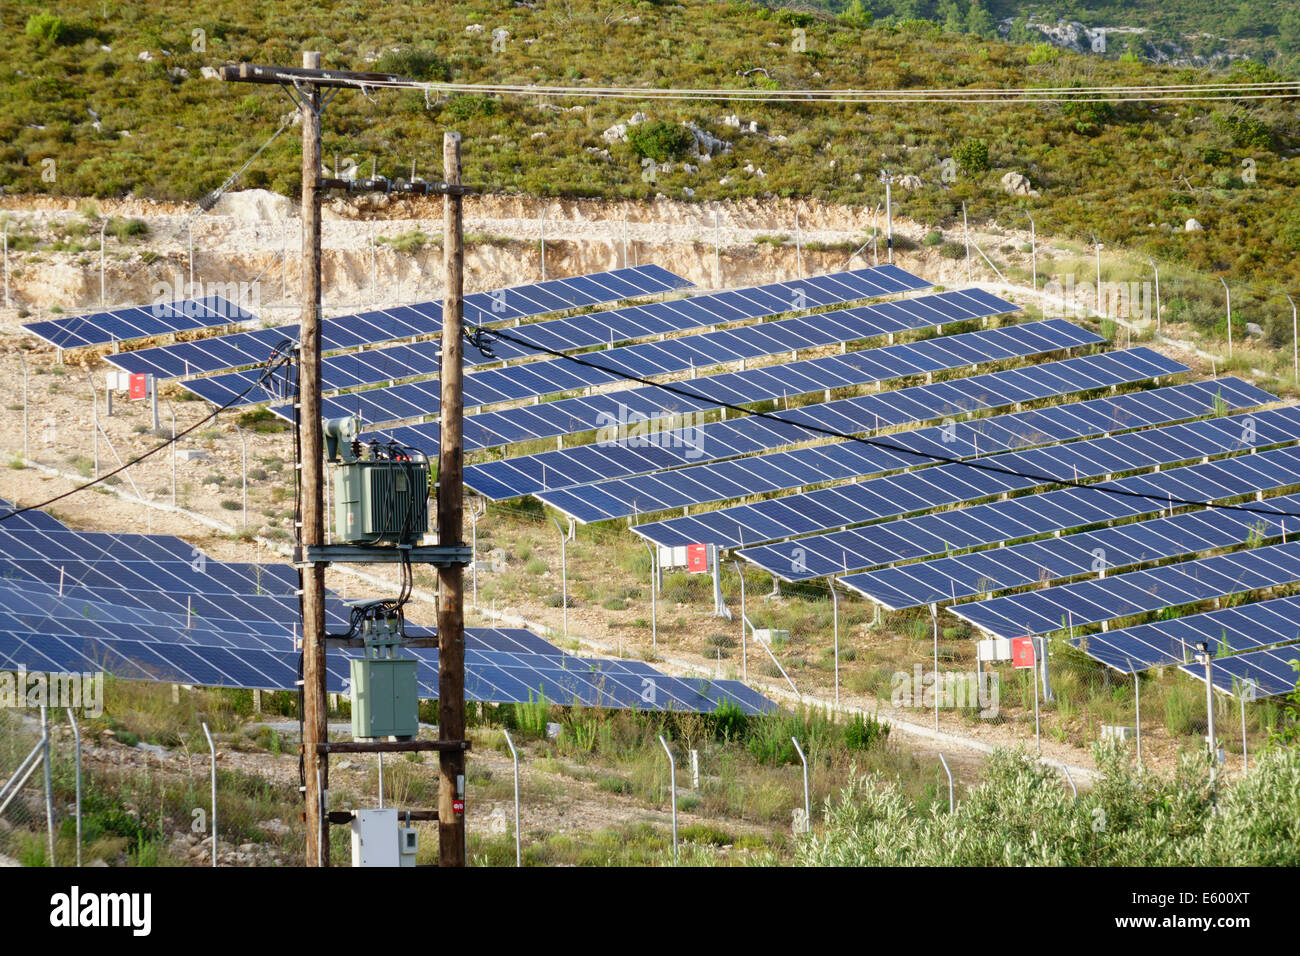 Zante, Greece - solar energy photovoltaic panel 'farm' in central Zante, in the middle of olive groves. Stock Photo